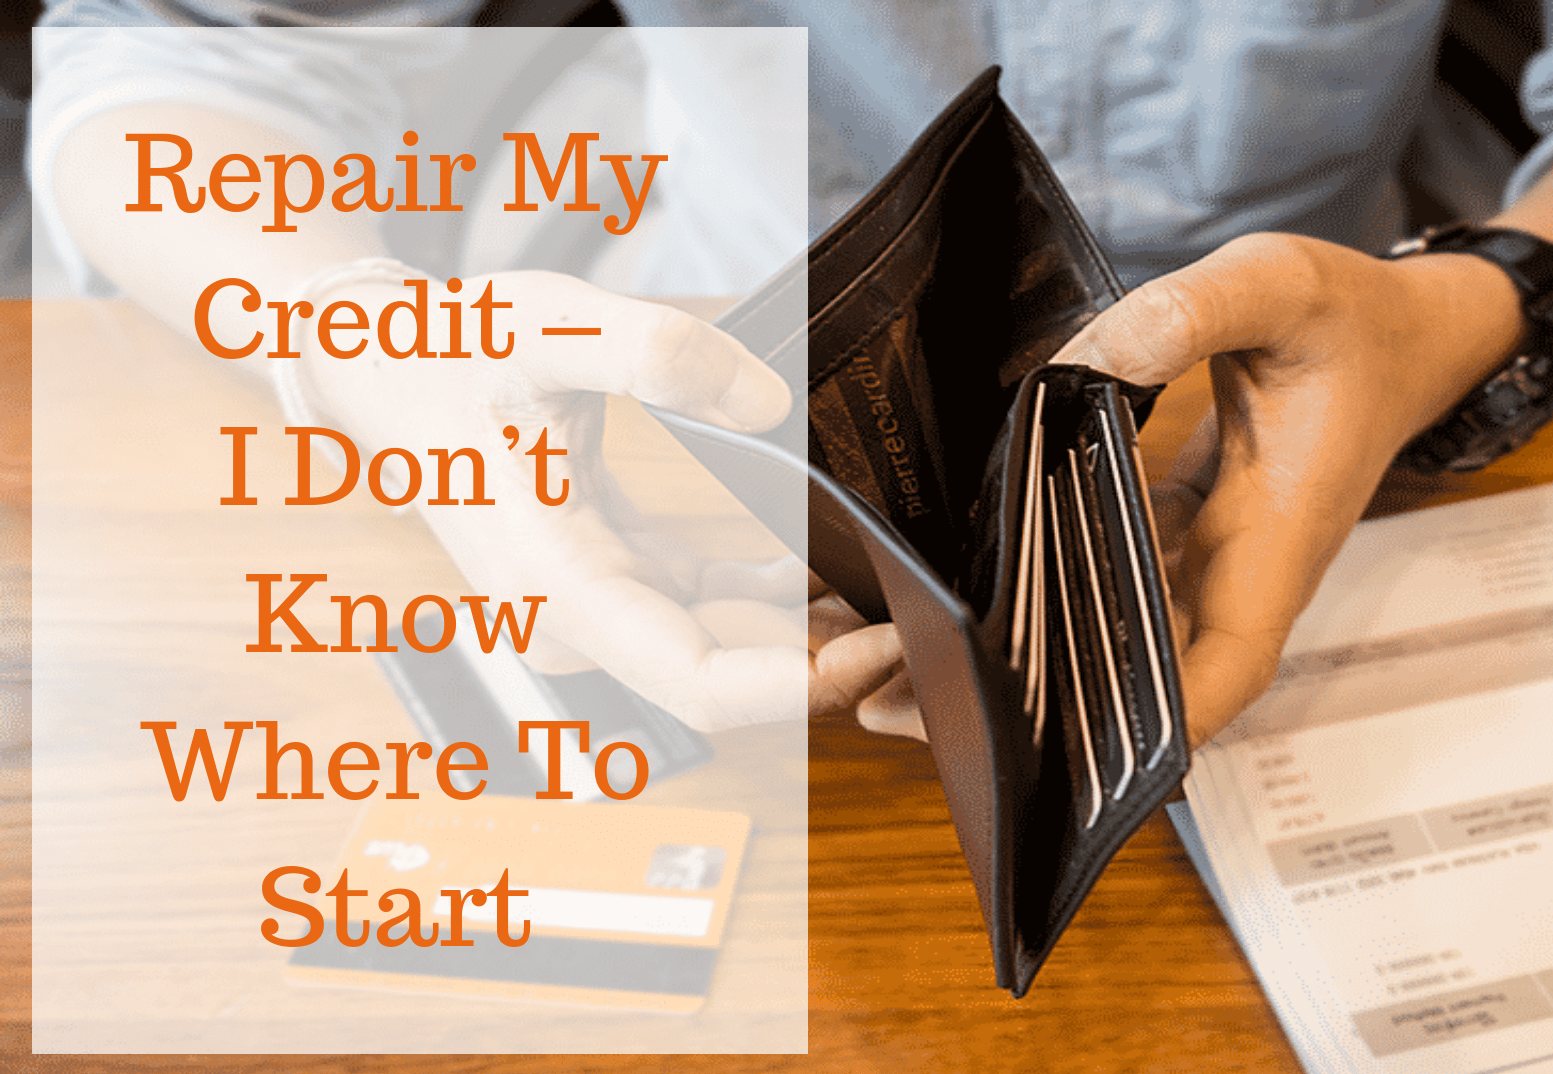 Repair My Credit – I Don’t Know Where To Start